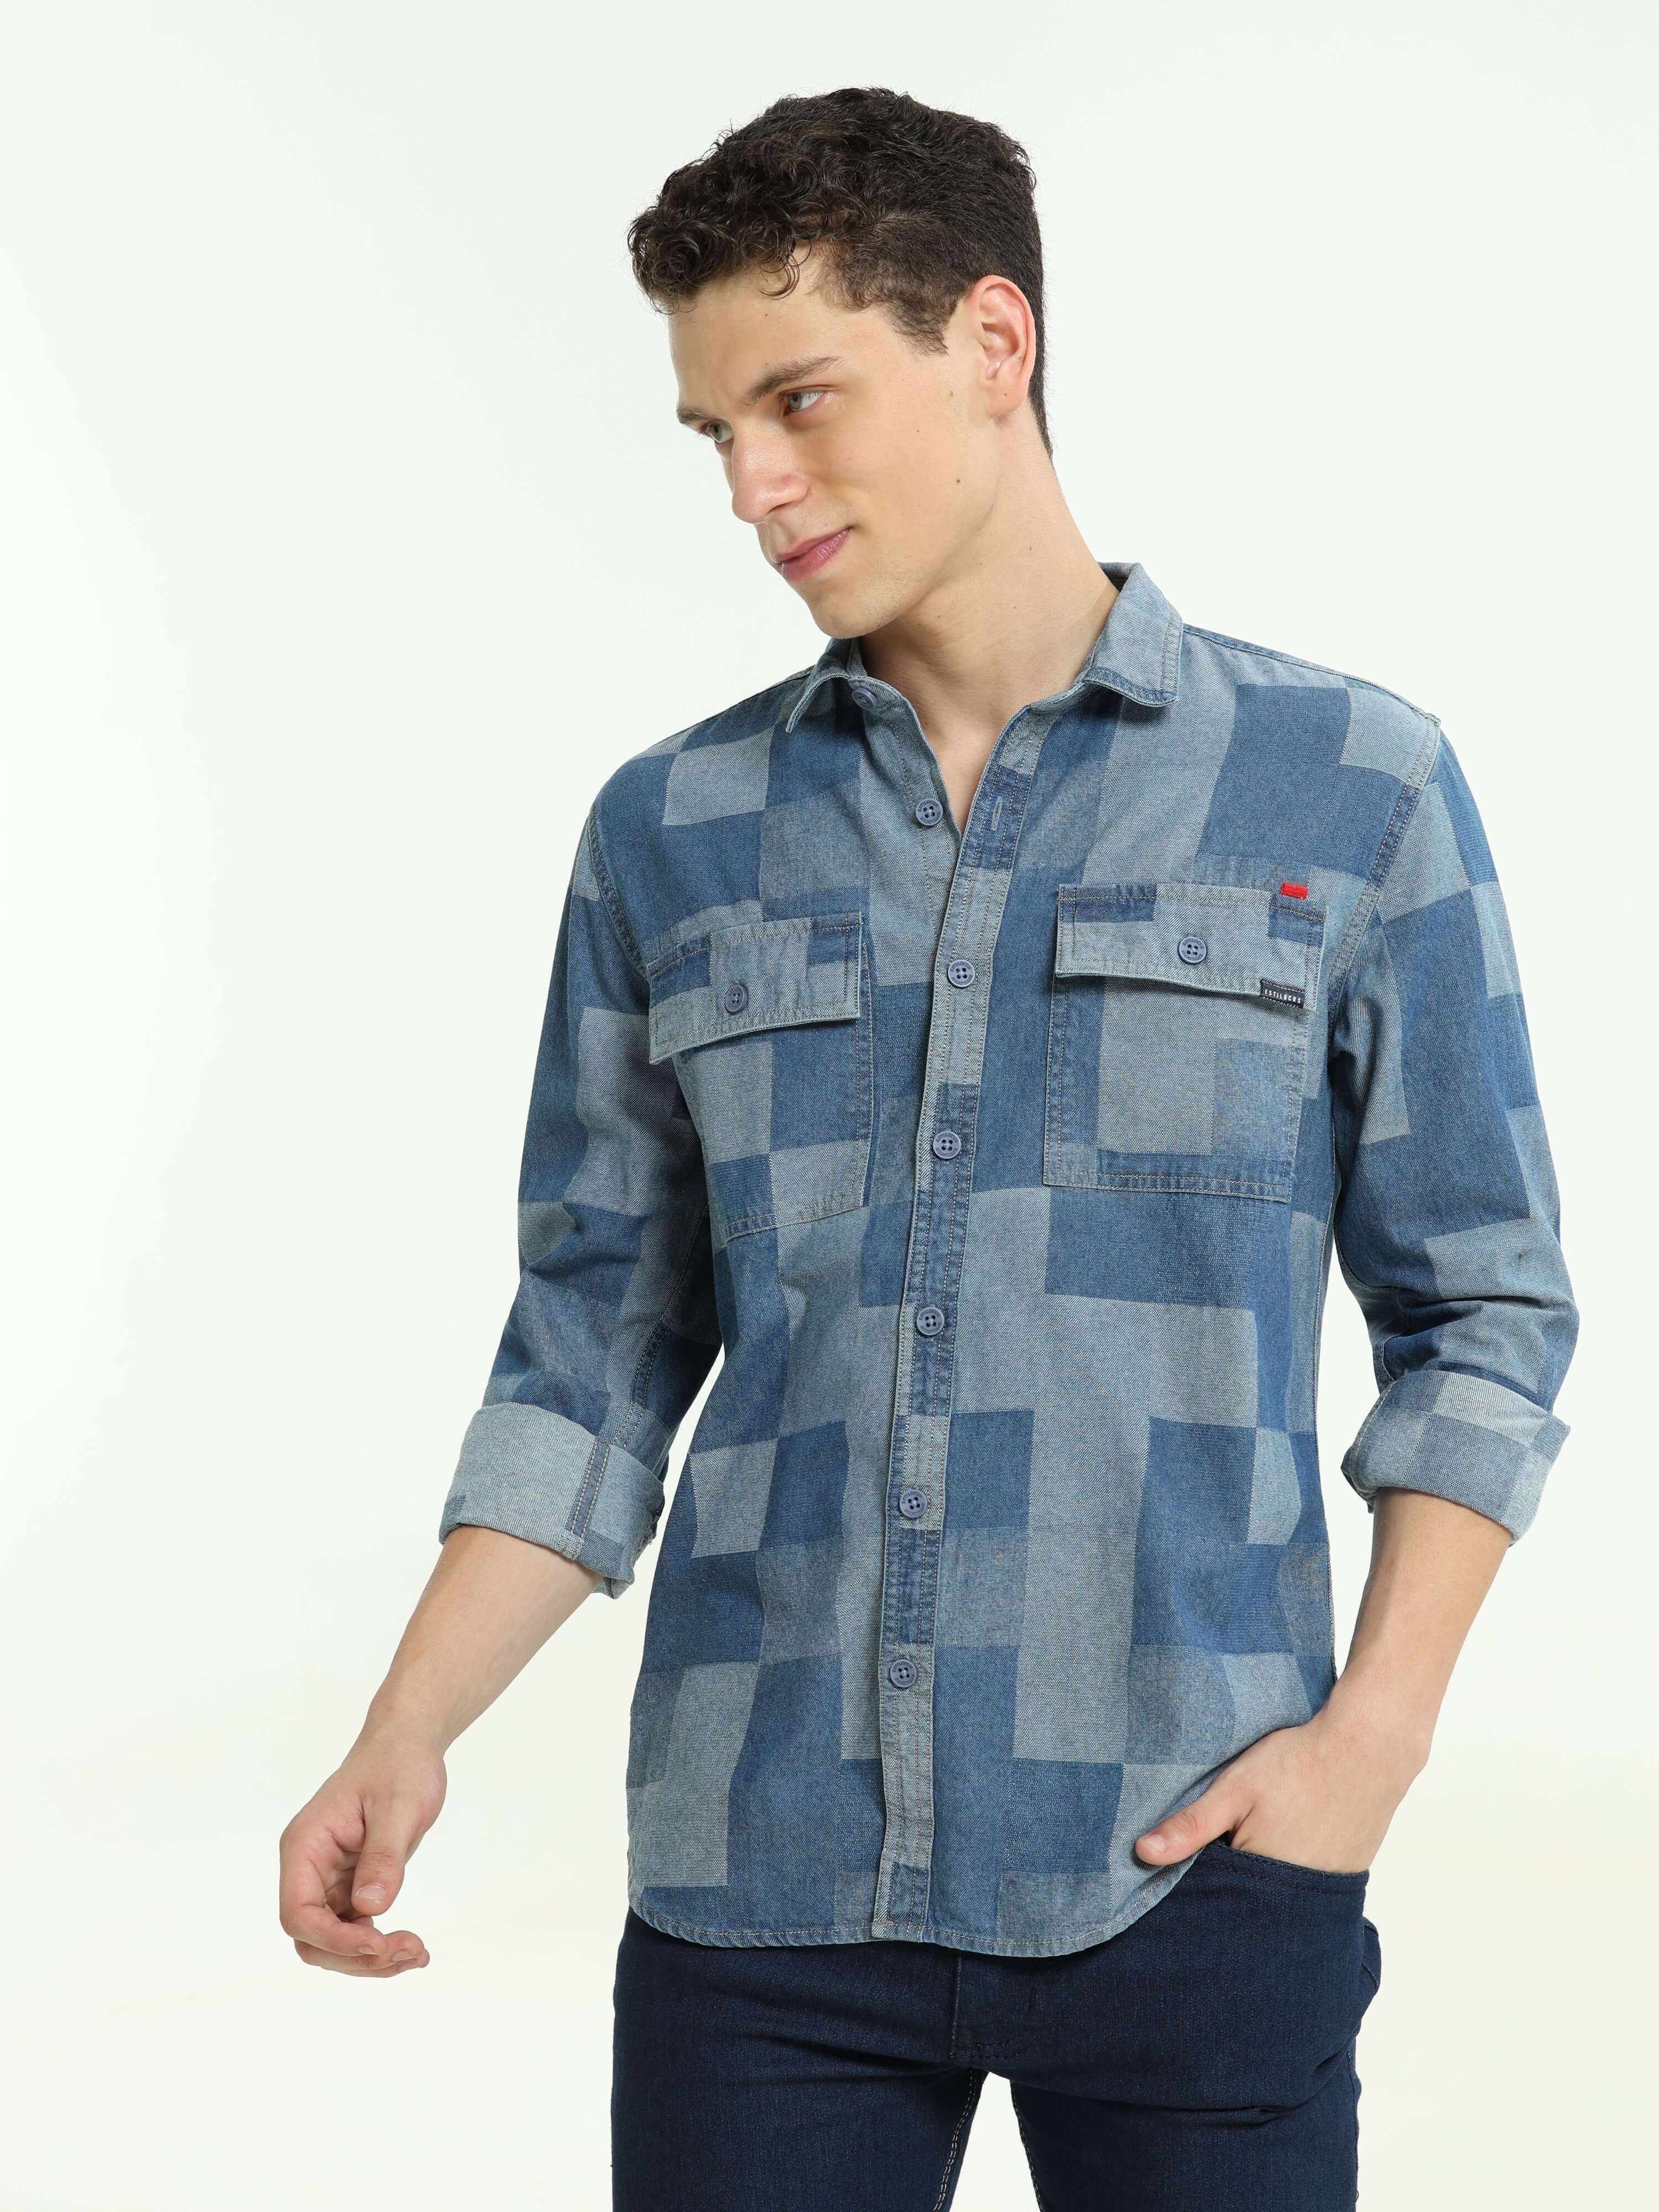 LS Denim multi blocked check shirt shop online at Estilocus. 100% Cotton • Full-sleeve check shirt• Cut and sew placket• Regular collar• Double button edge cuff • Double pocket with flap • Curved bottom hemline . • All double needle construction, finest q